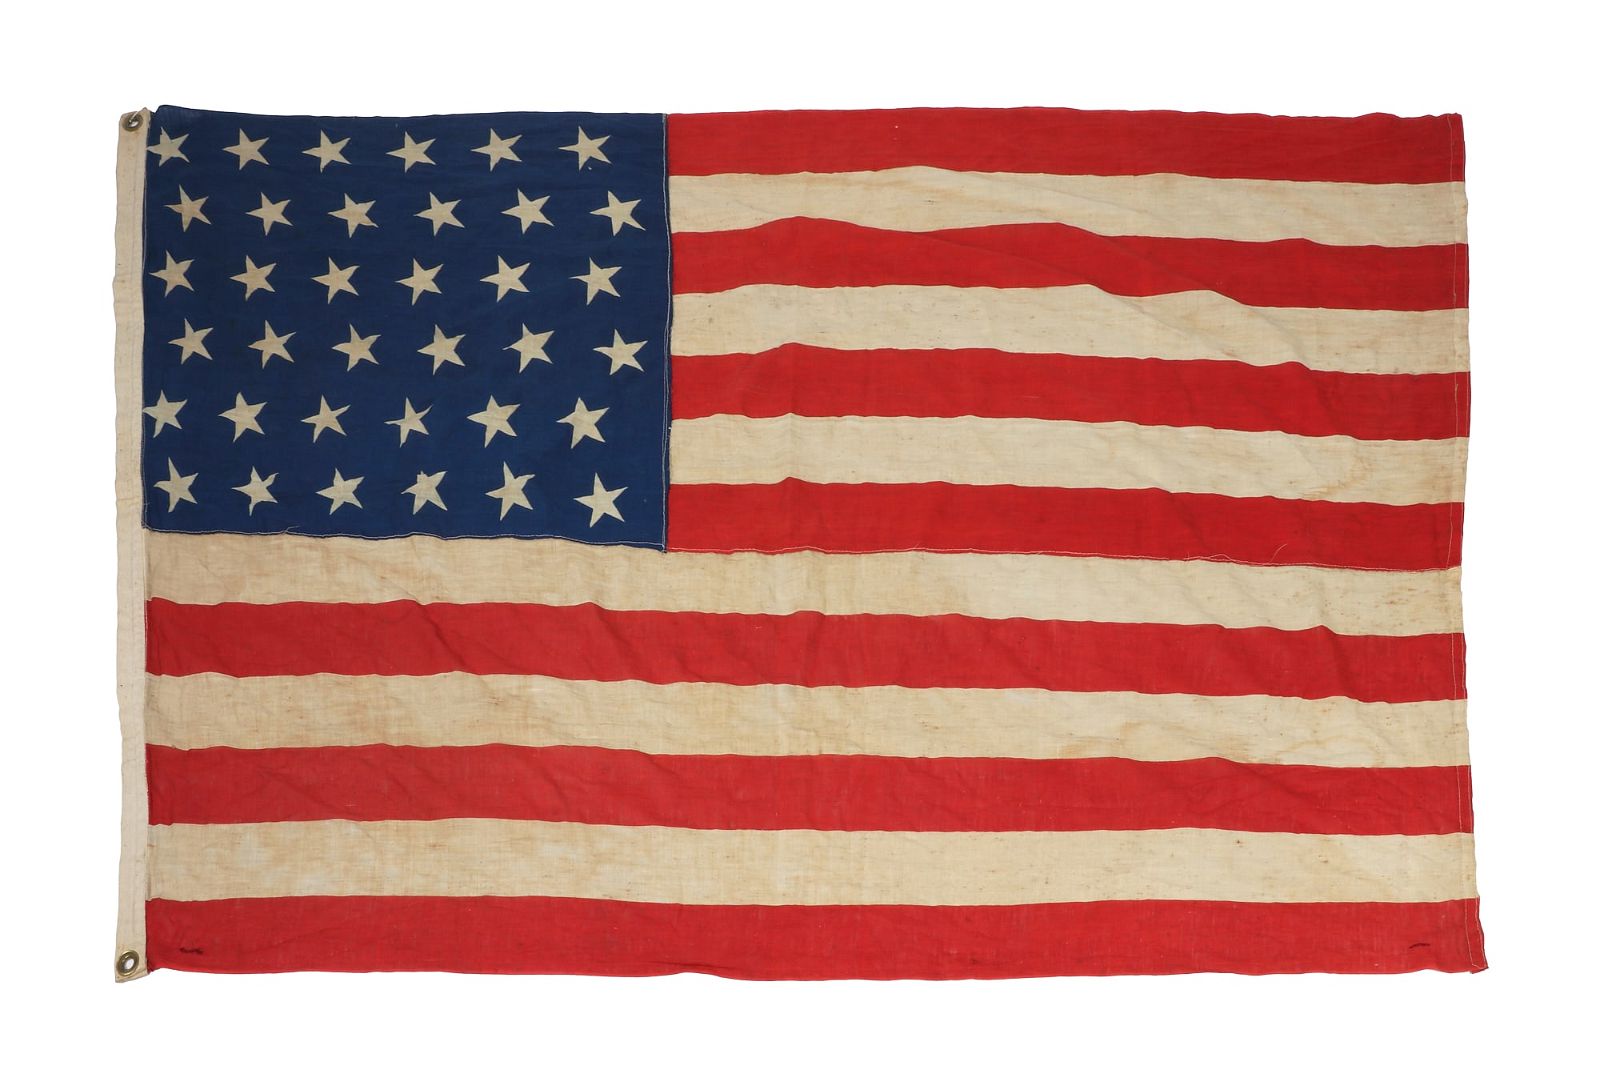 A 36-STAR AMERICAN FLAG COMMEMORATING